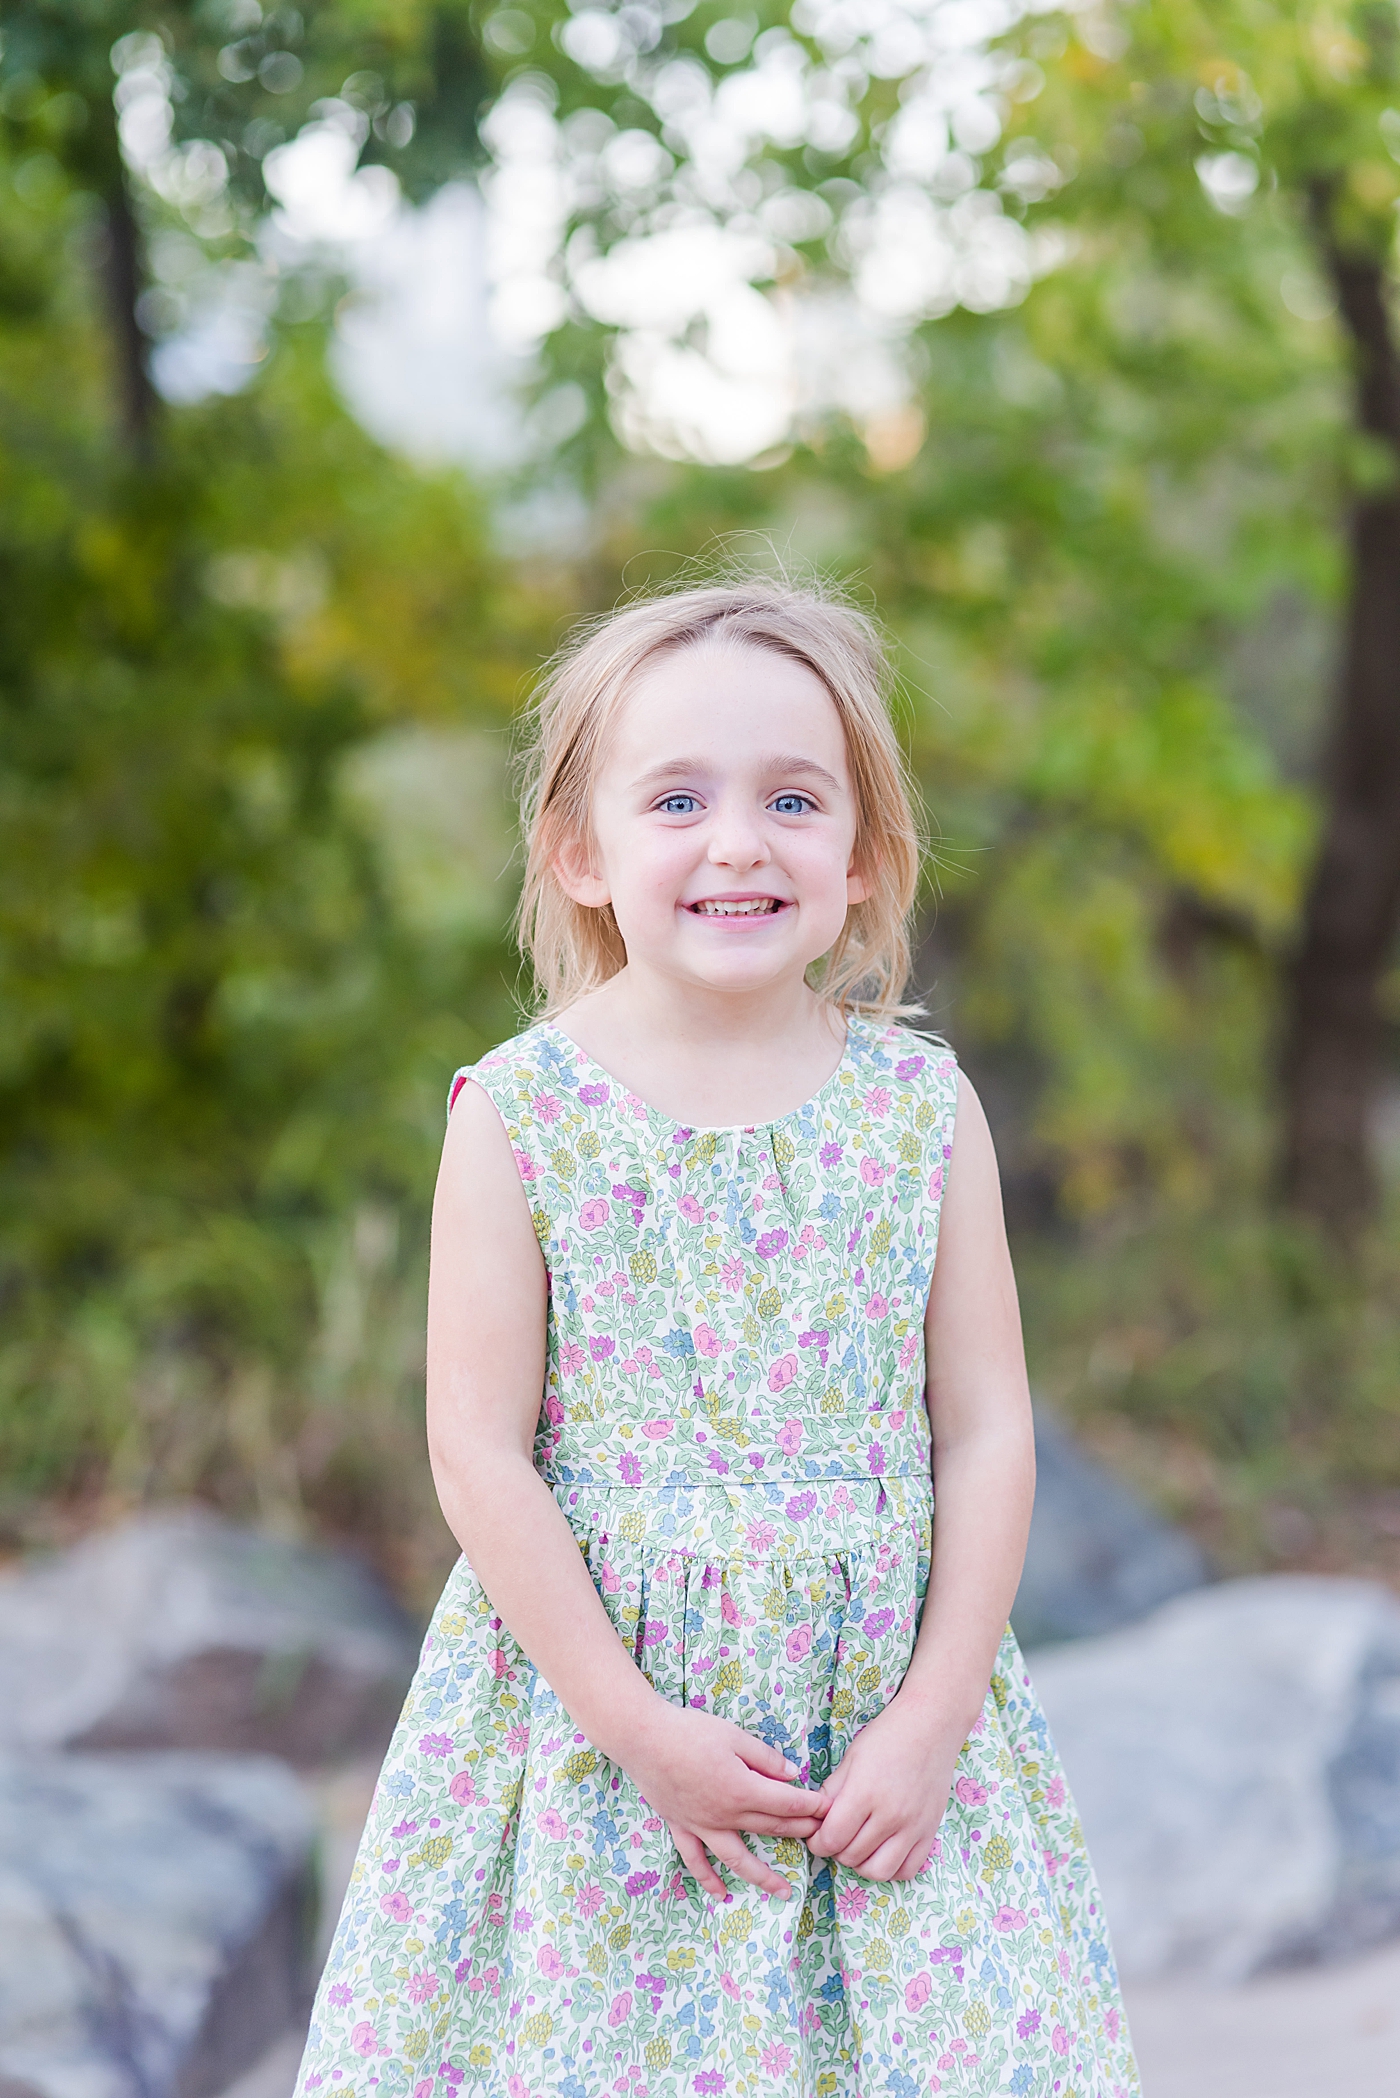 Little girl in floral print dress smiling | Photo by Anna Wisjo Photography